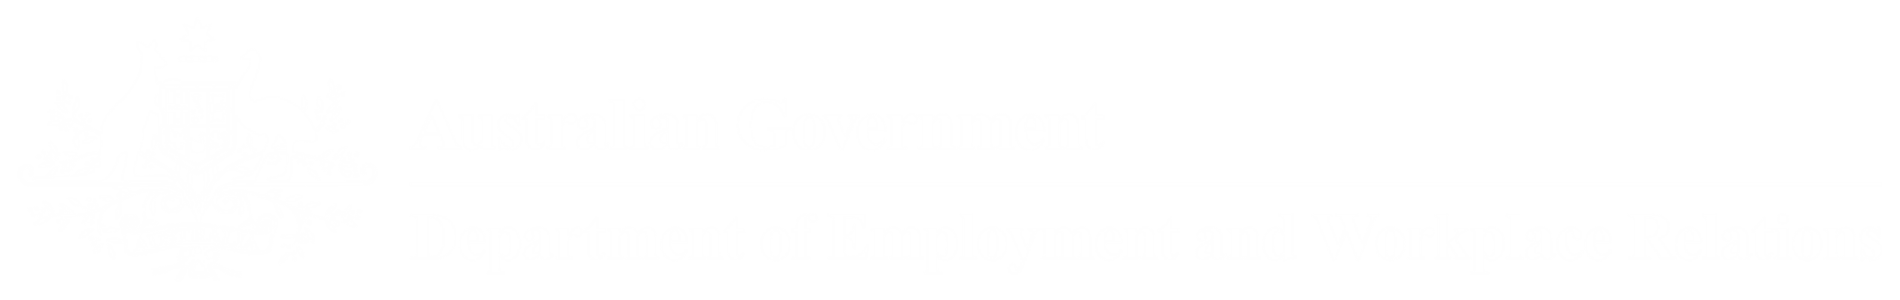 Australian Department of Employment and Workplace Relations Government logo